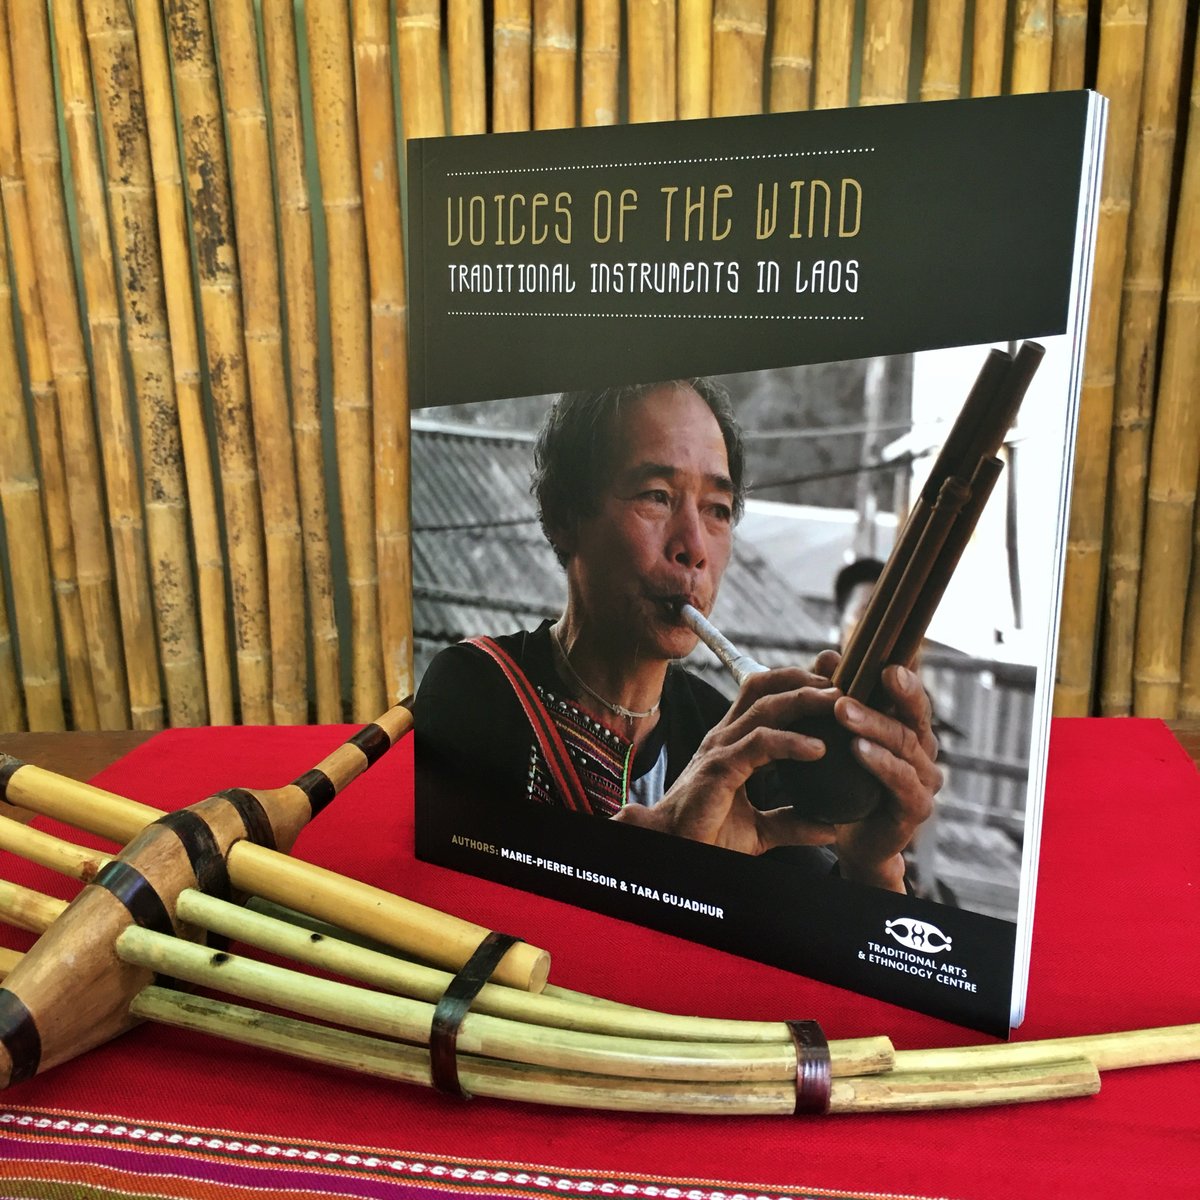 Image of "Voices of the Wind: Traditional Instruments in Laos"